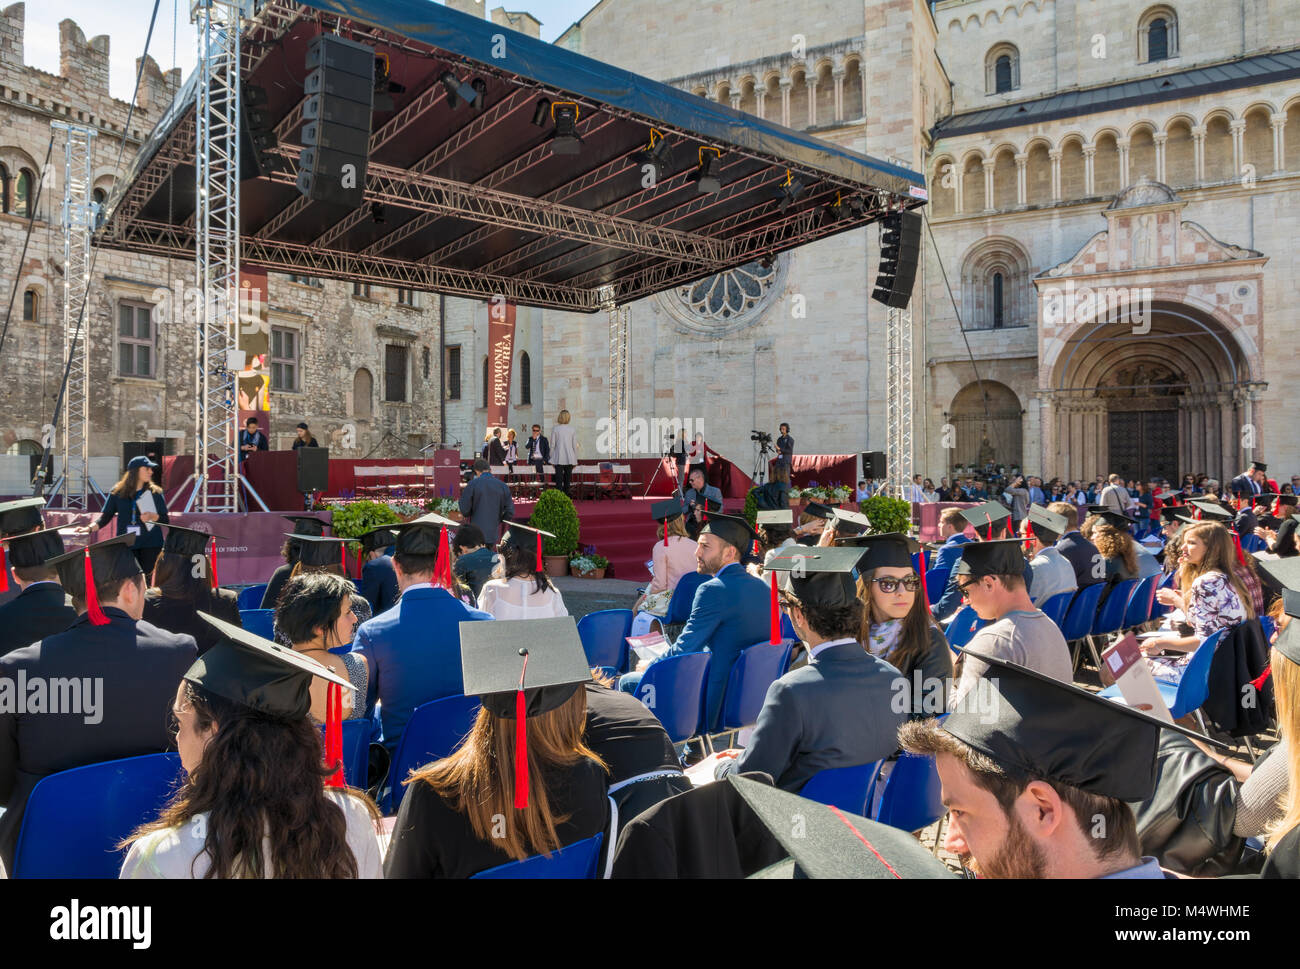 the graduation ceremony in the main square of the city of Trento. The city is famous for the prestigious universities. Stock Photo